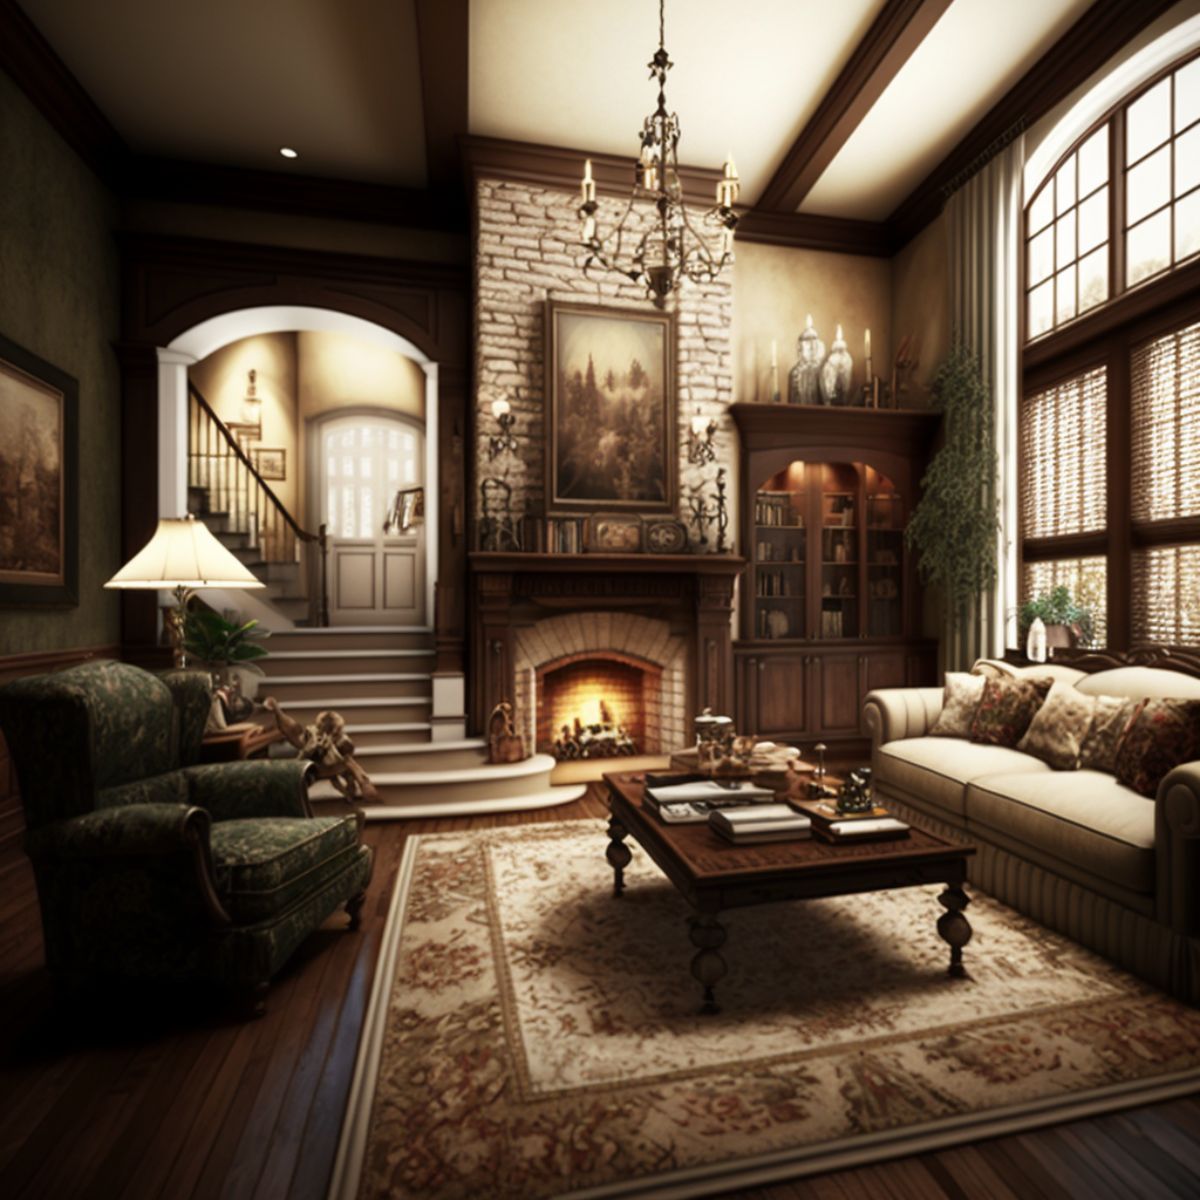 Traditional living room style